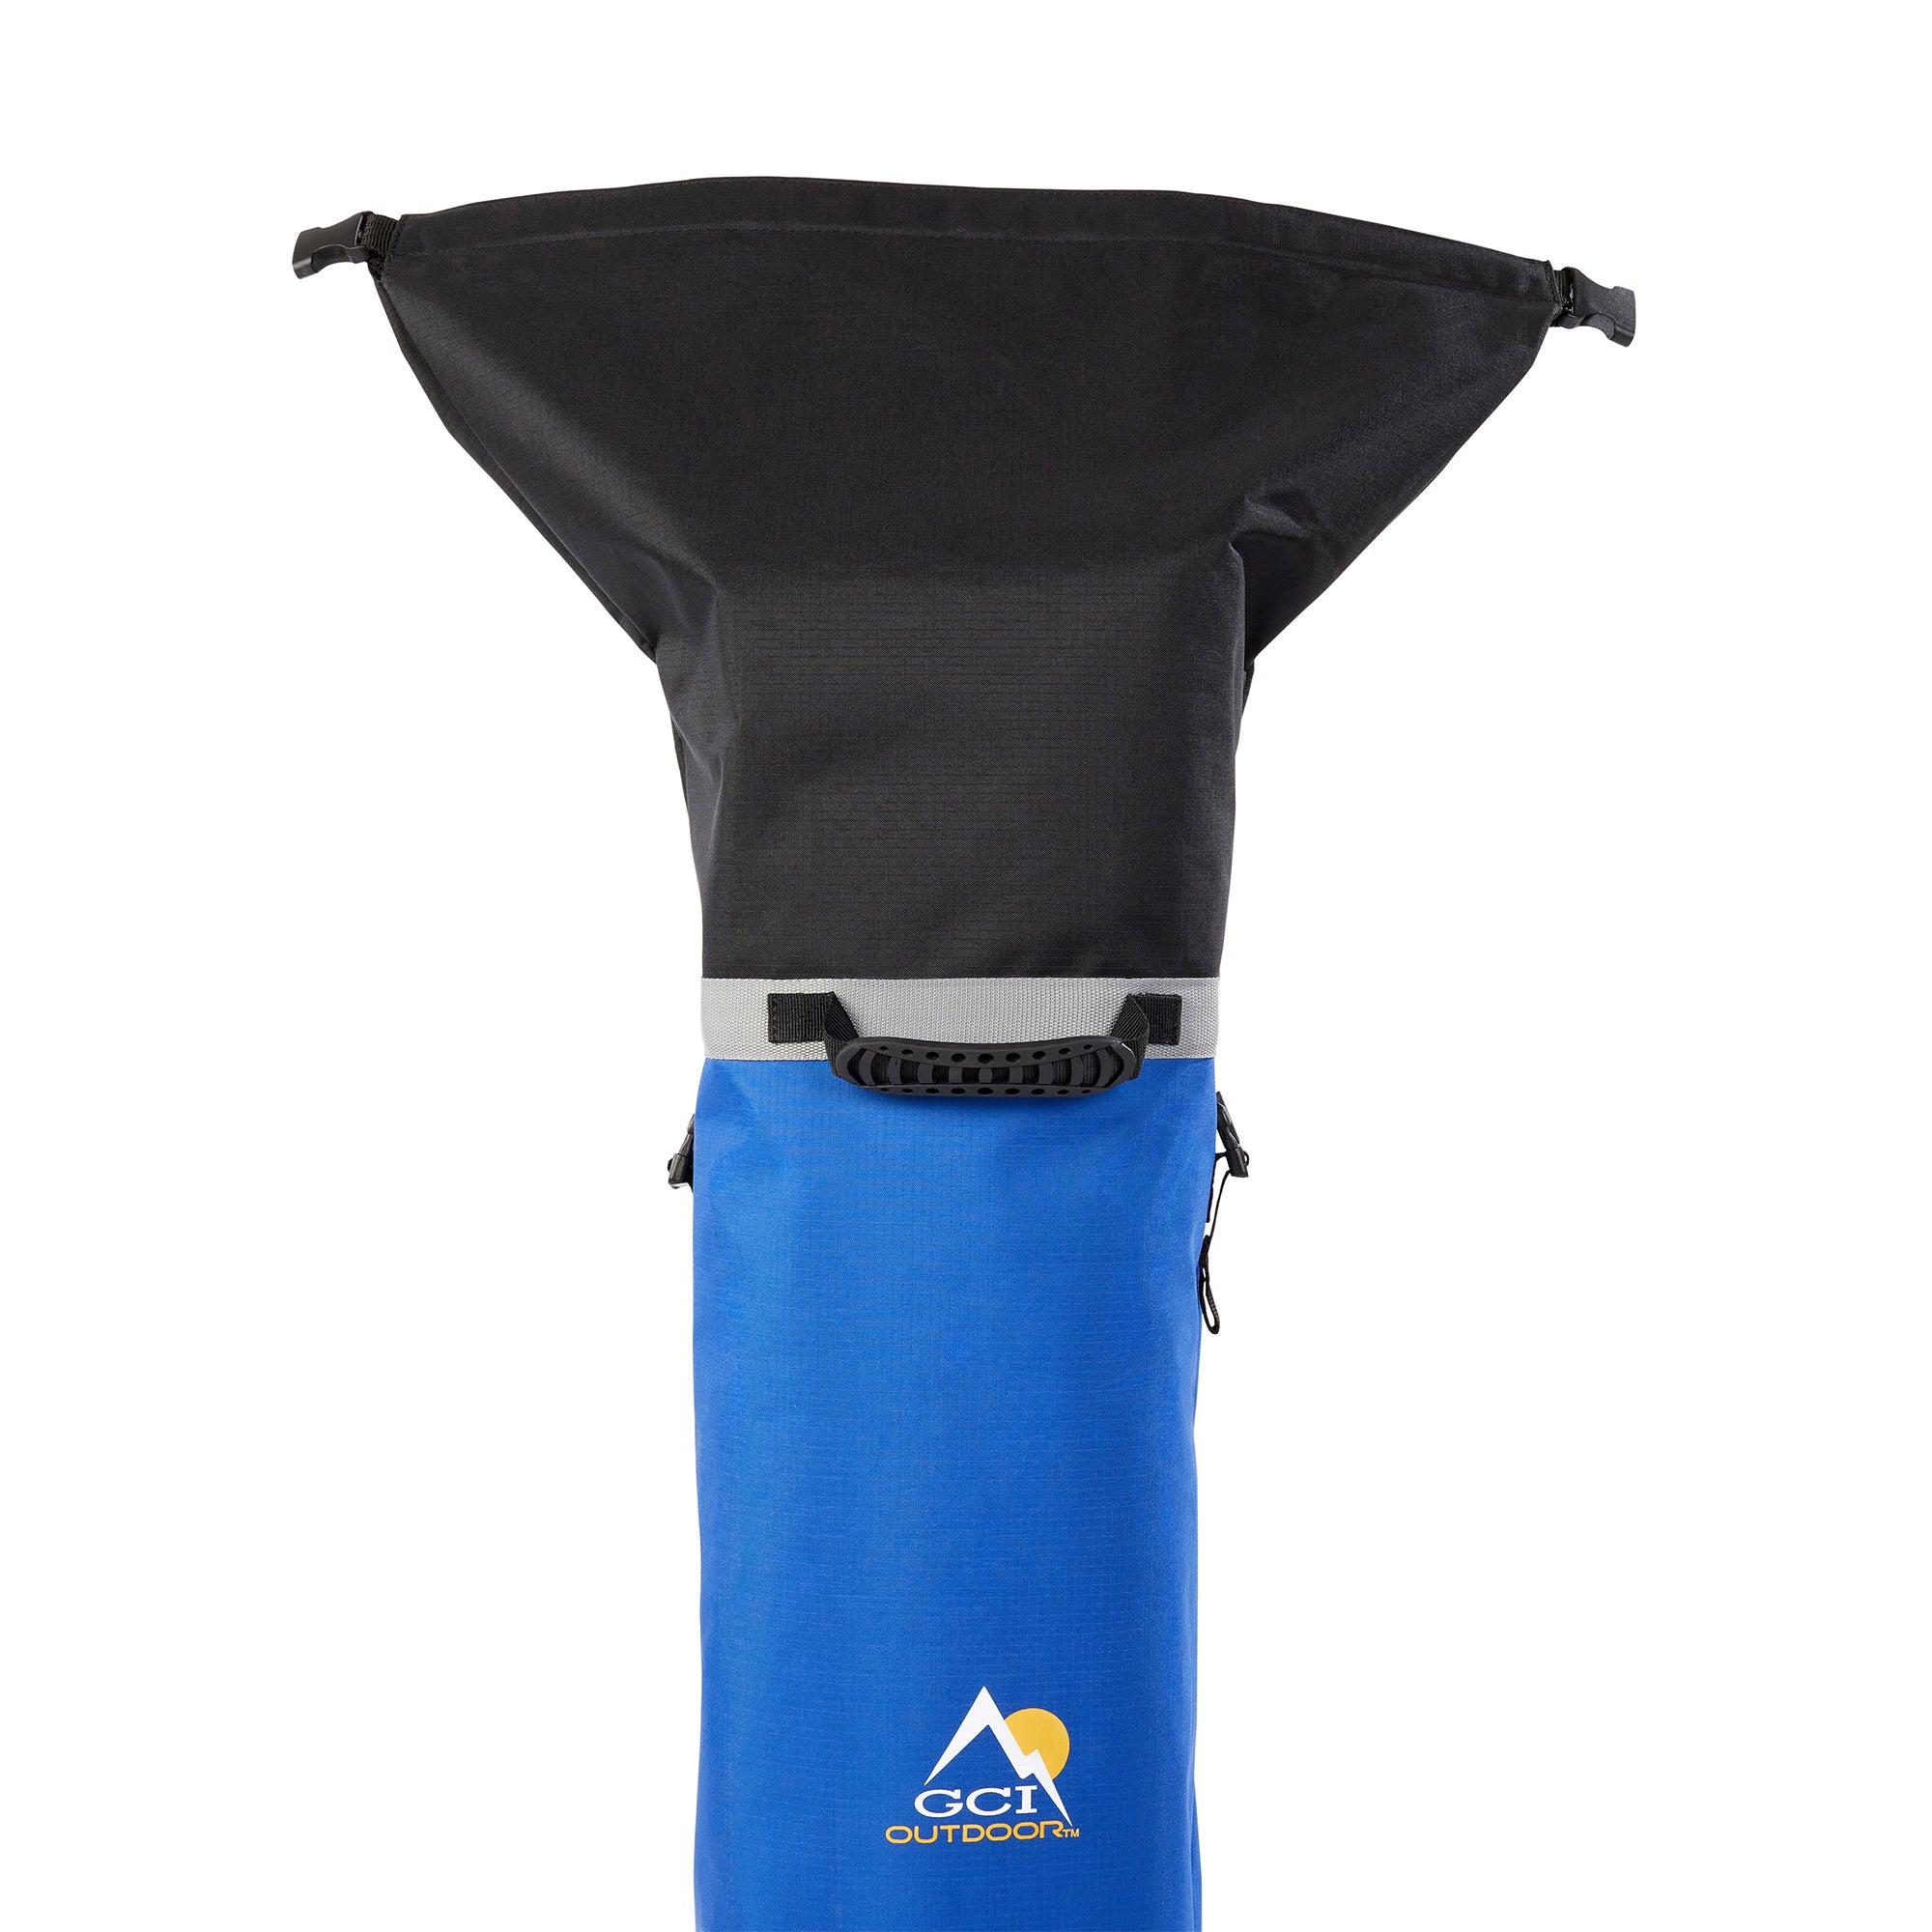 LevrUp Canopy, Royal Blue, Large Mouth Opening